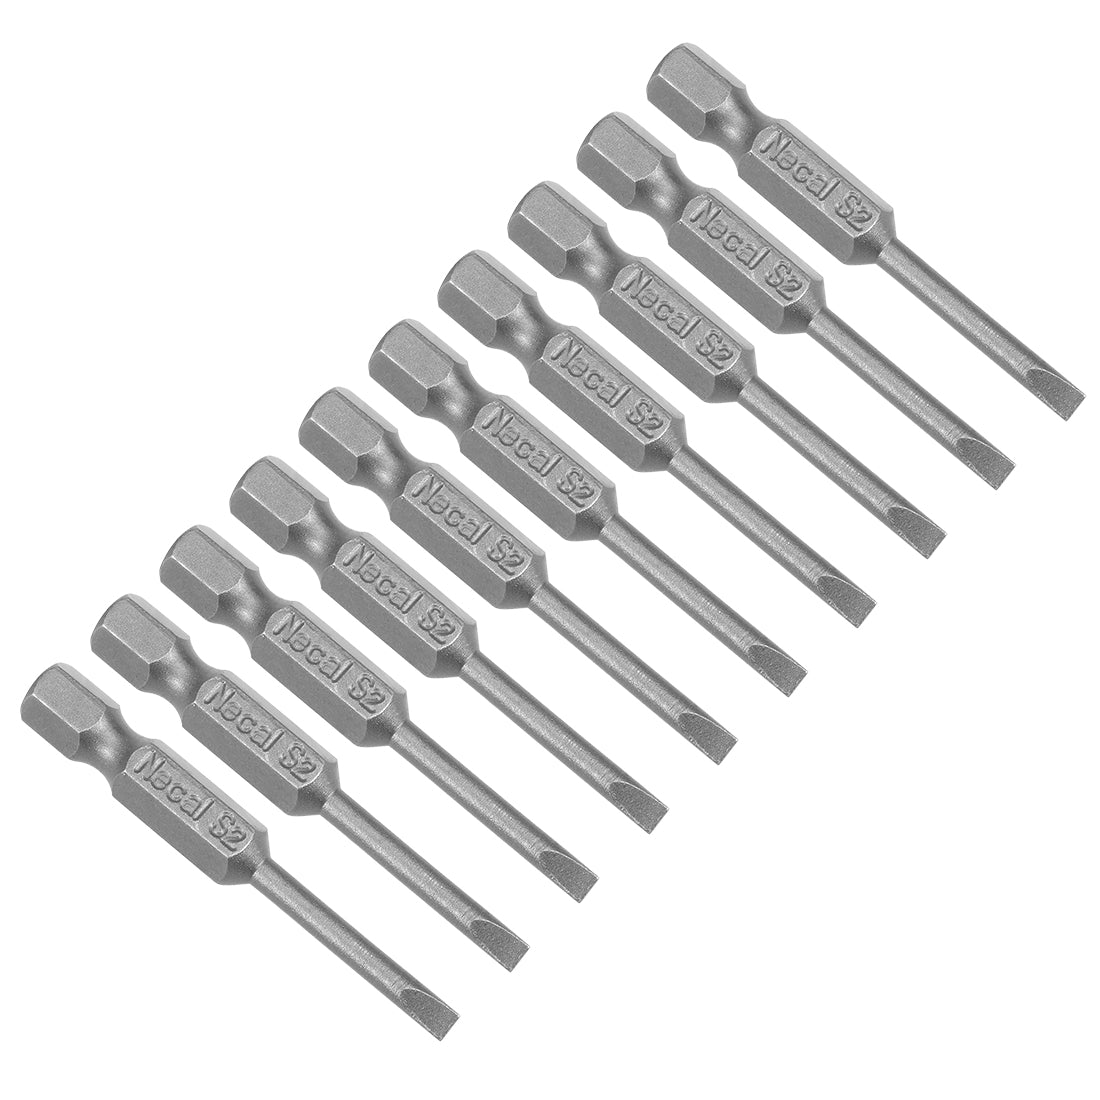 uxcell Uxcell 10Pcs 1/4" Hex Shank 50mm Length Magnetic SL3 Slot Head Screwdriver Bits S2 Alloy Steel